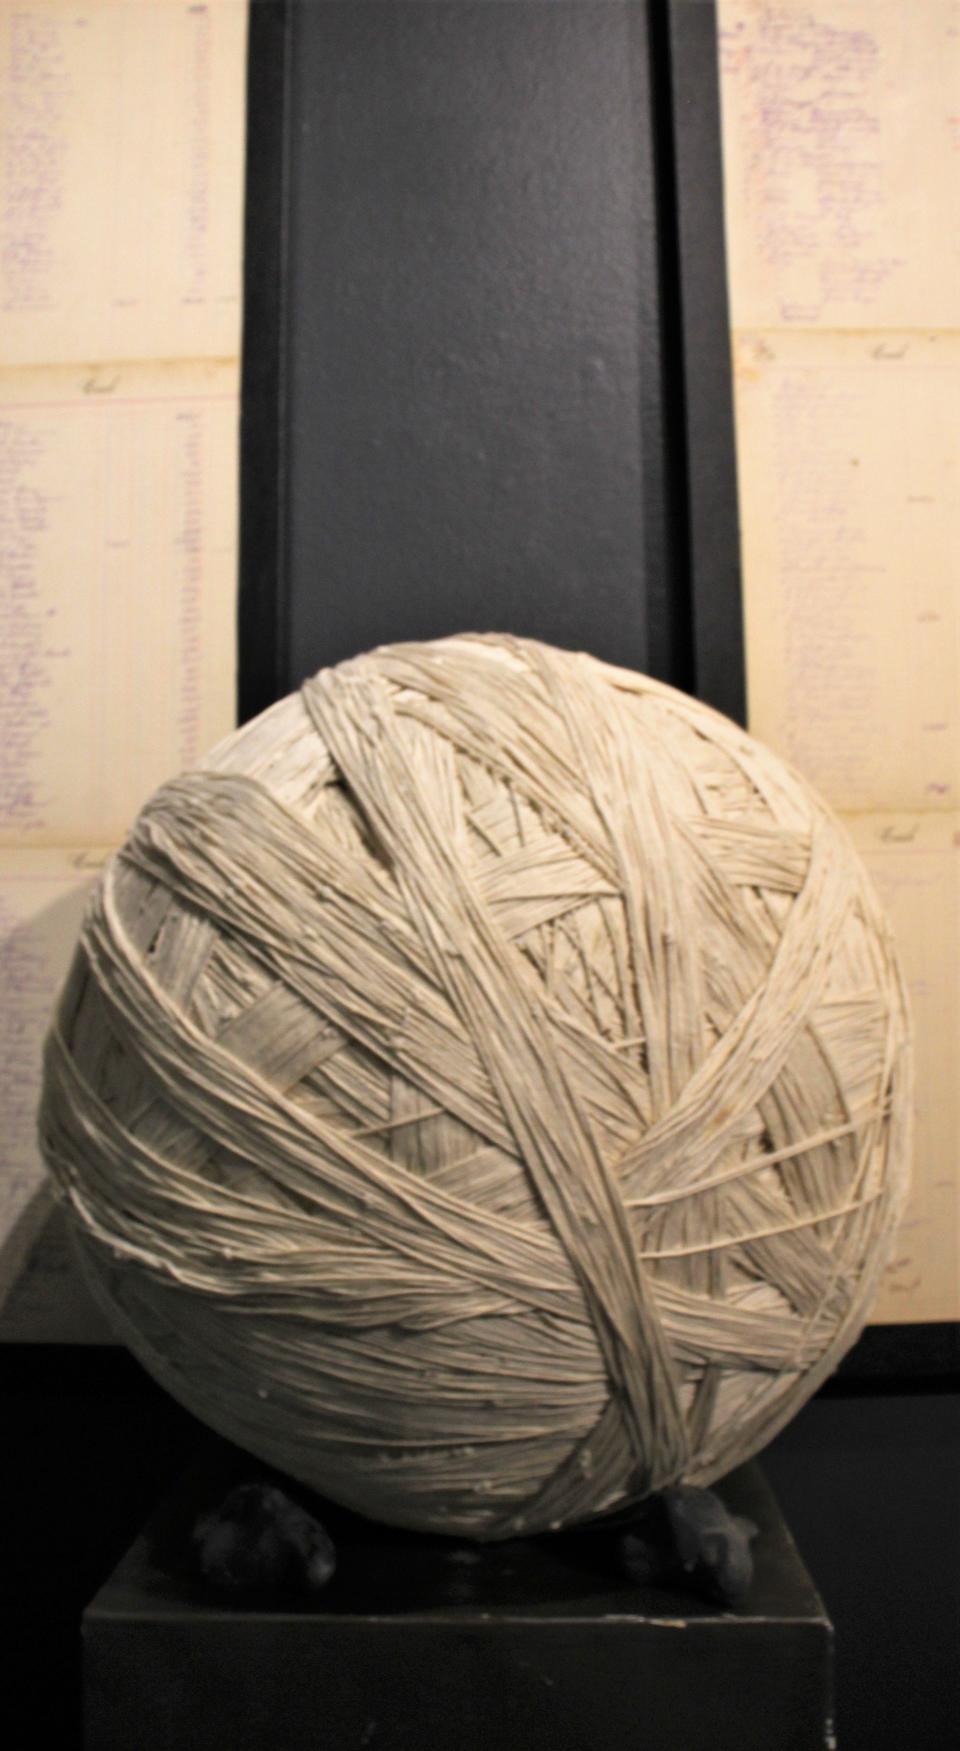 Perhaps it's not the world's biggest ball of twine (that's is Caulker City, Kan.), but it's likely the largest at the Center for Contemporary Arts and maybe in the big city of Abilene.